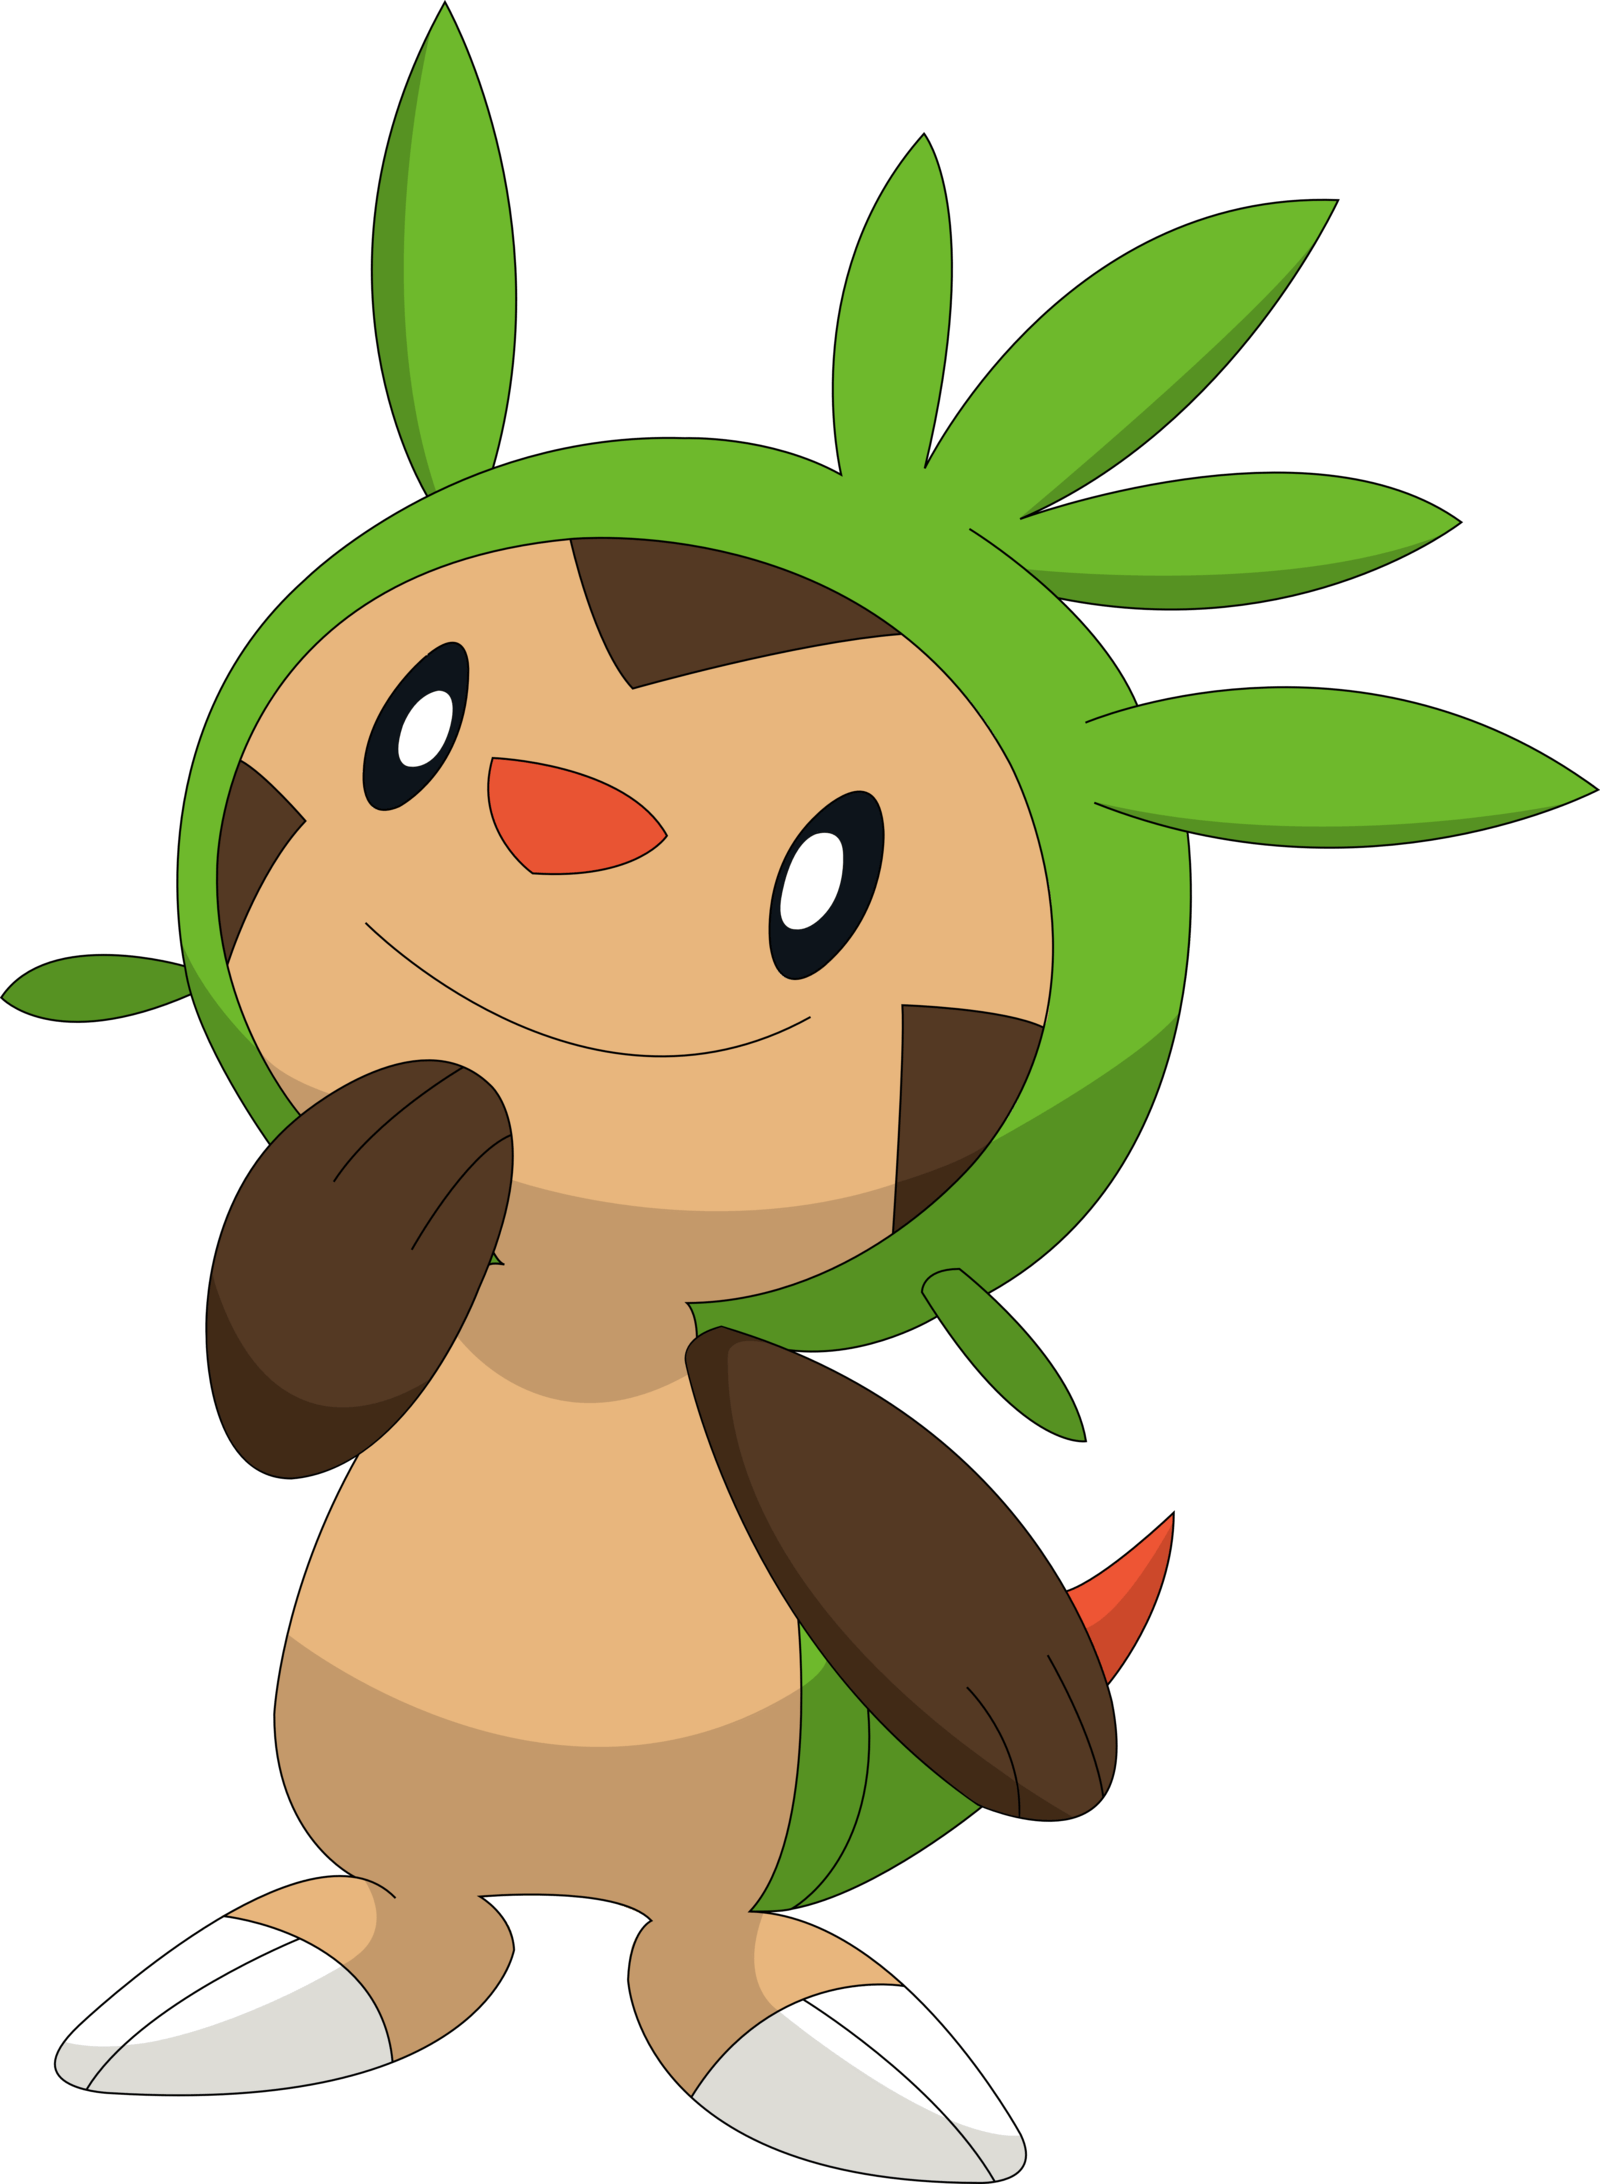 chespin - Image Search Results. pokemon party